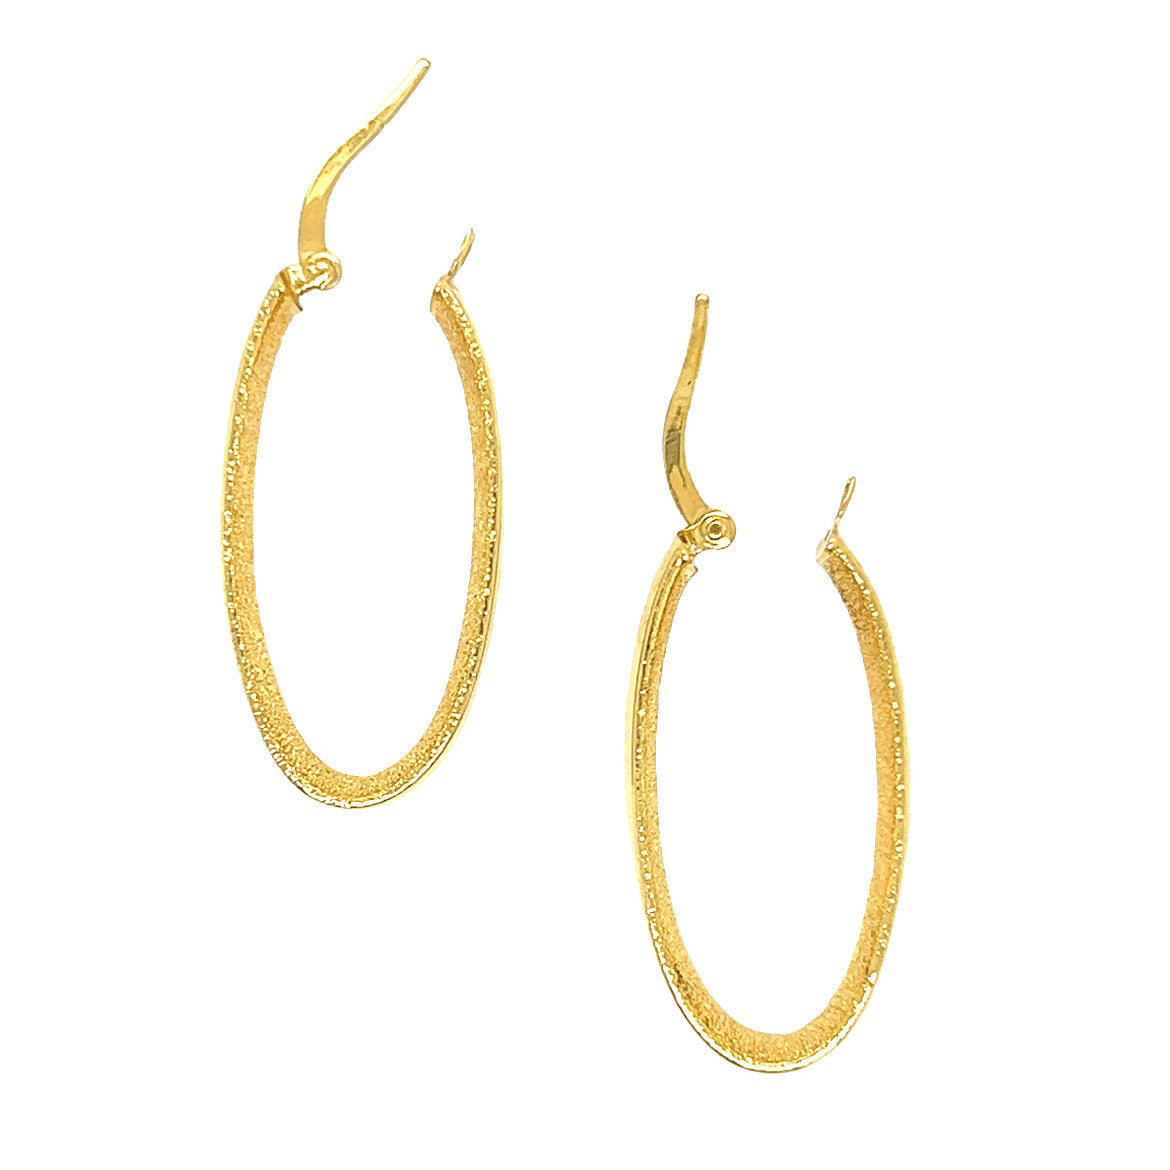 Oval Hoop 6mm Earrings with Star Dust Finish in 14K Yellow Gold Opend Clasp